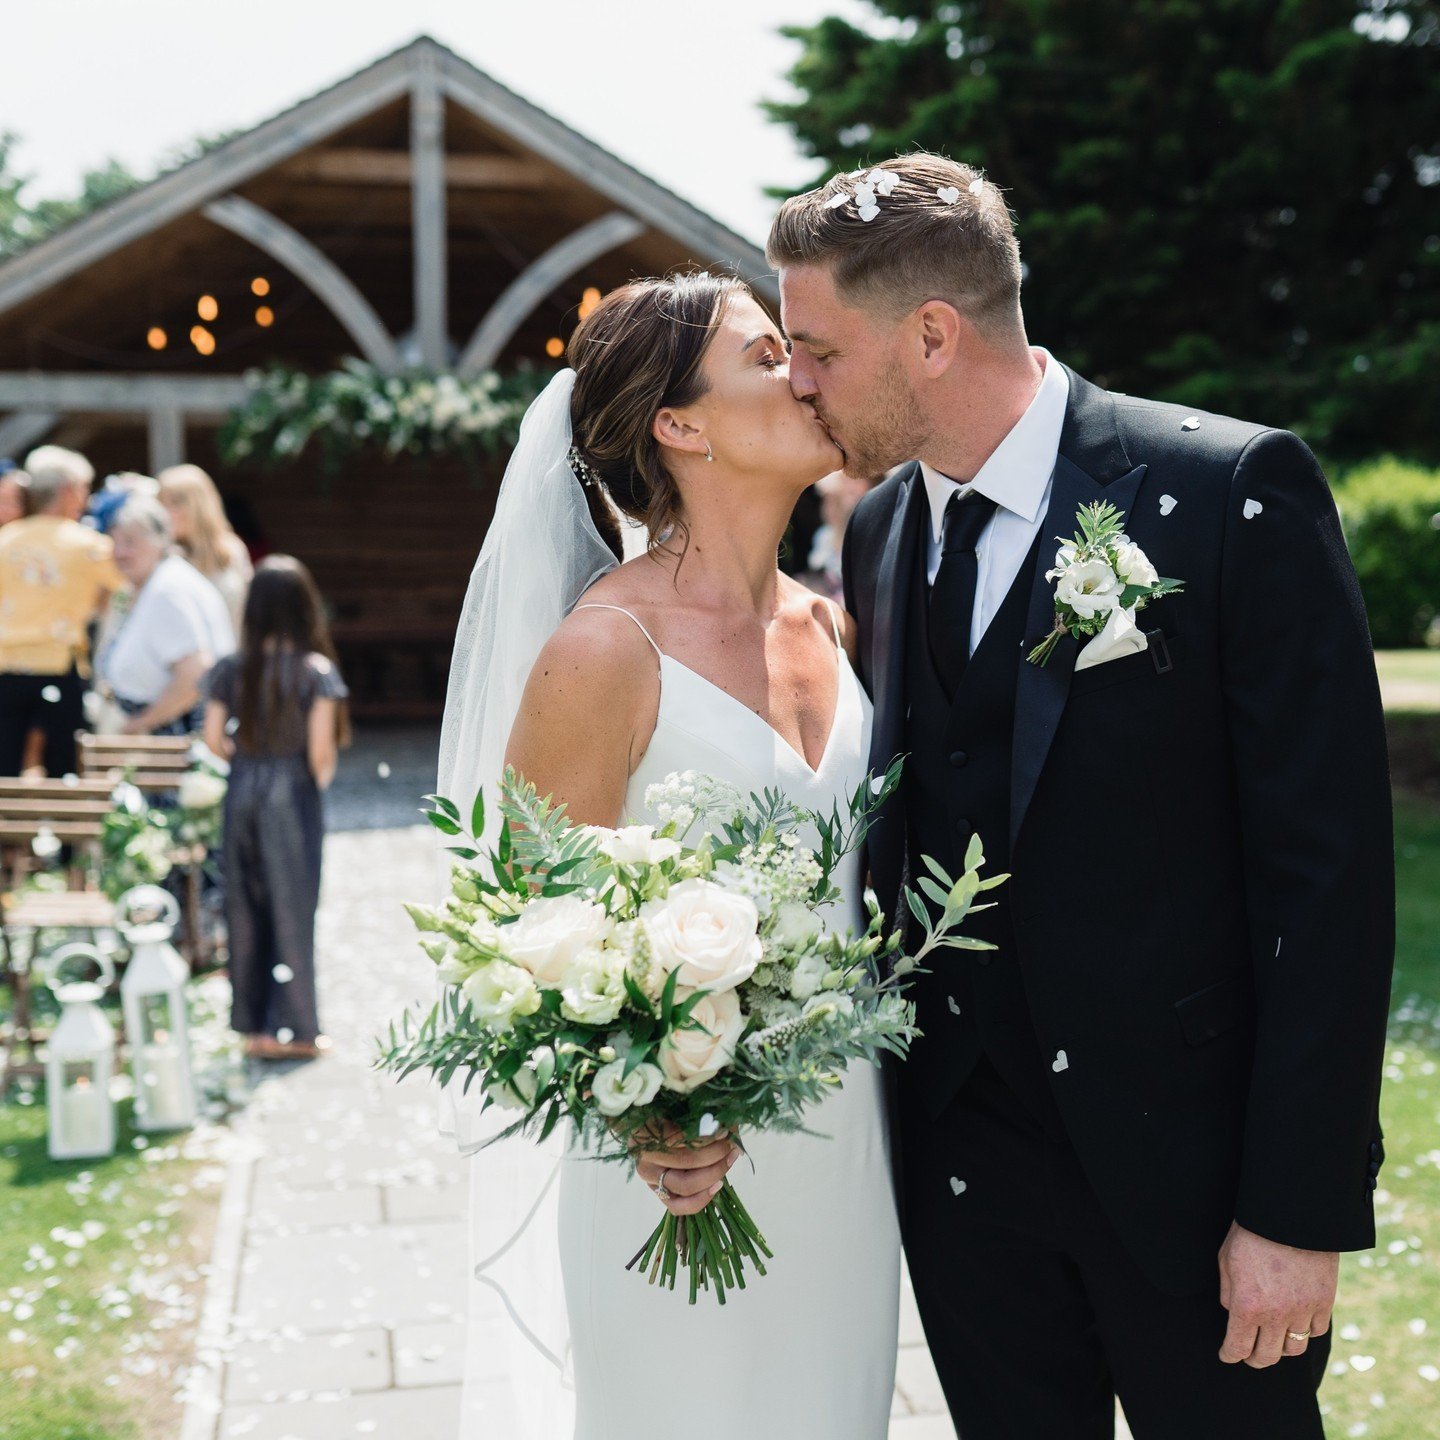 Grab your partner and your checklist, because we're turning Balmer Lawn into the ultimate wedding wonderland! 💍

Join us for 'The New Forest Wedding Show' on April 21st from 10am to 3pm to meet 50 incredible suppliers and find inspiration around eve